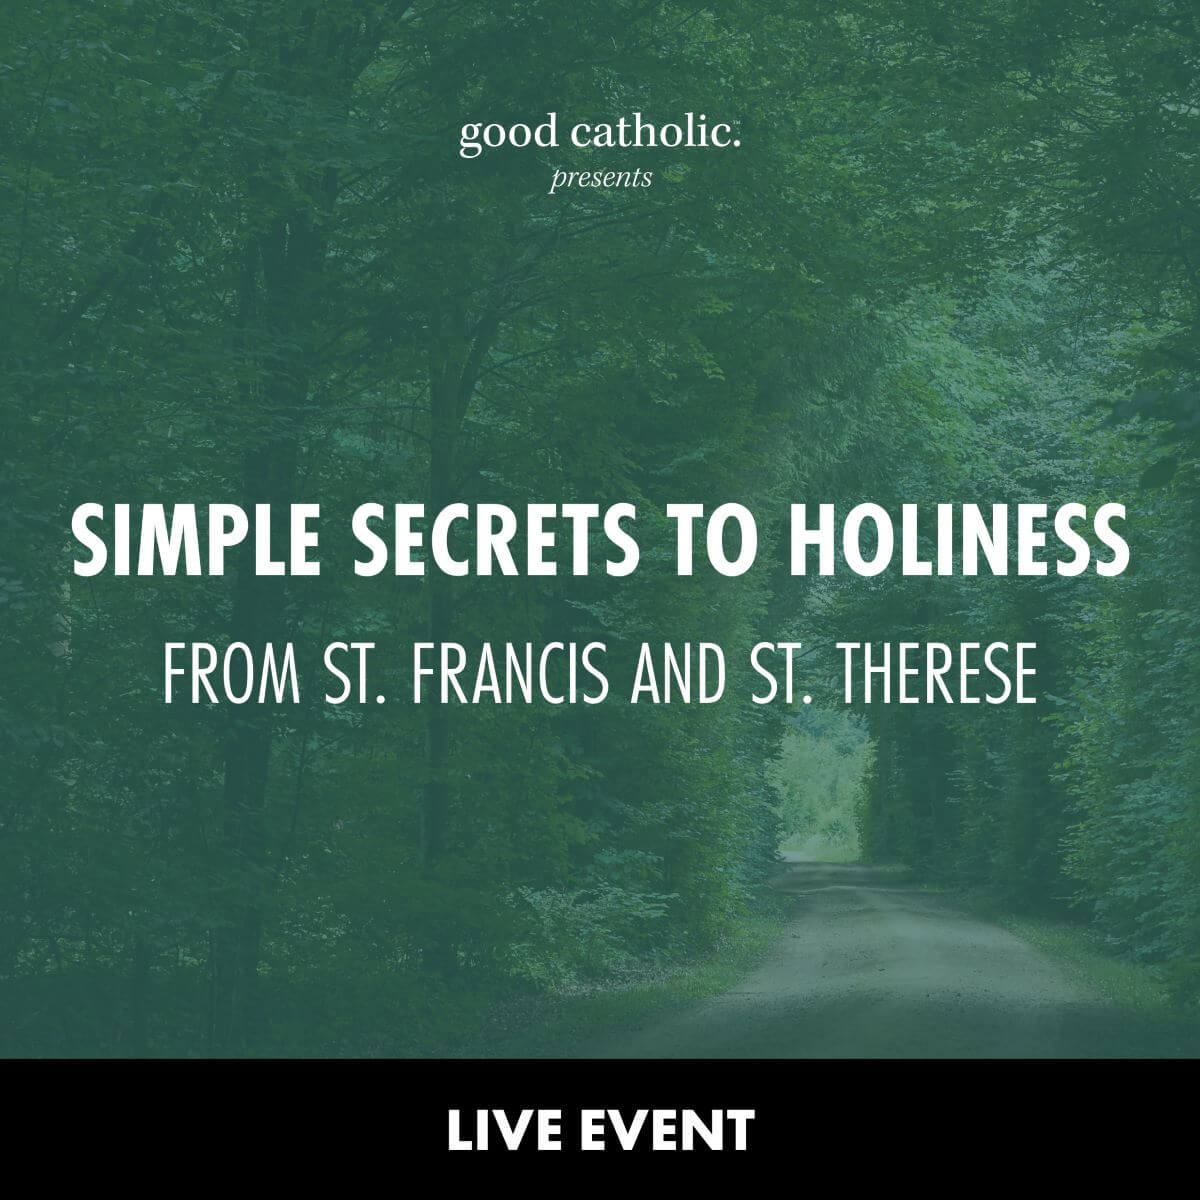 Simple Secrets to Holiness from St. Francis and St. Therese